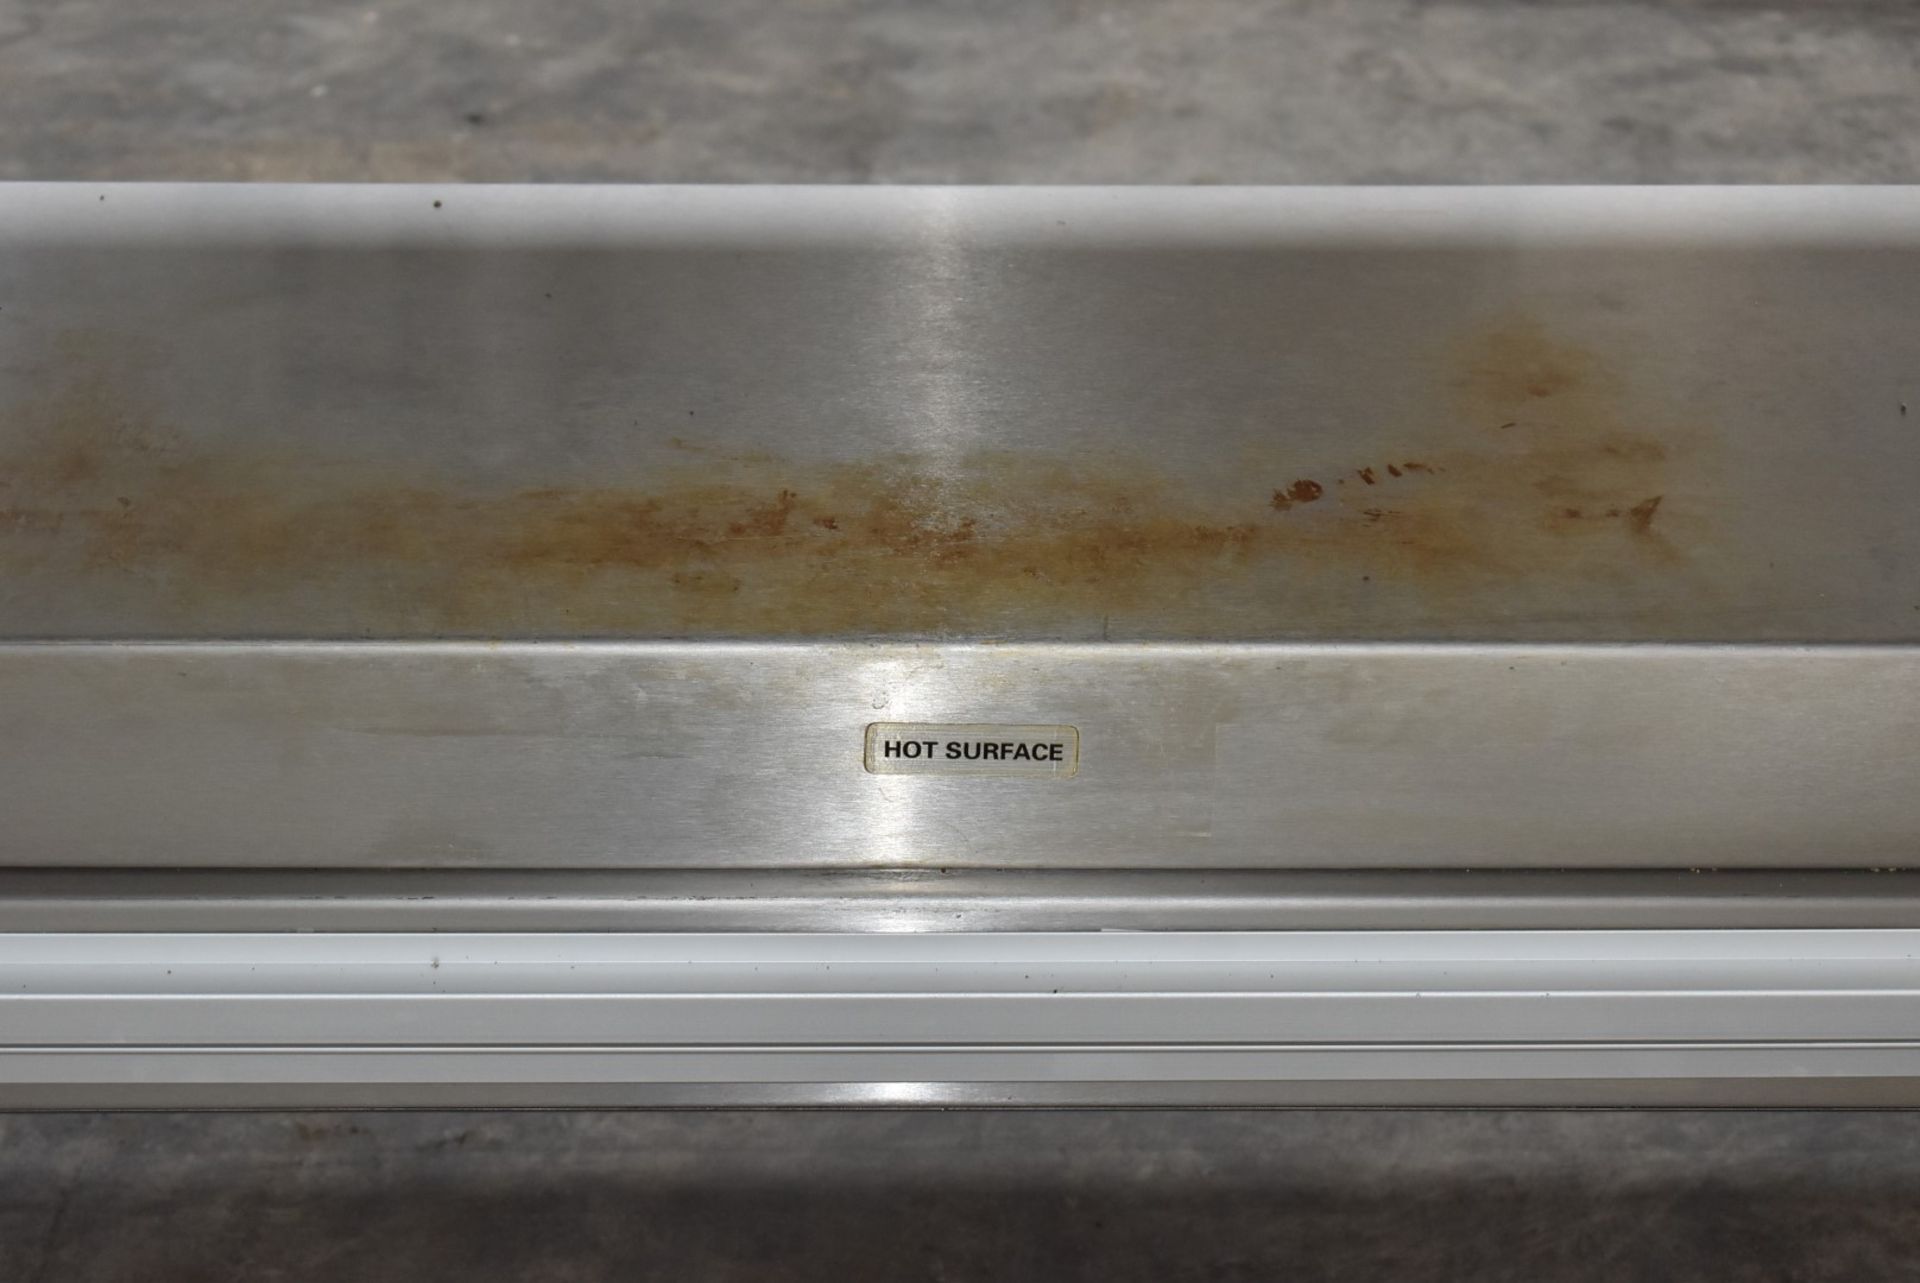 1 x Stainless Steel Bench Mounted Passthrough Food Warmer With Ticket Rails Ref SL254 WH4 - - Image 3 of 5